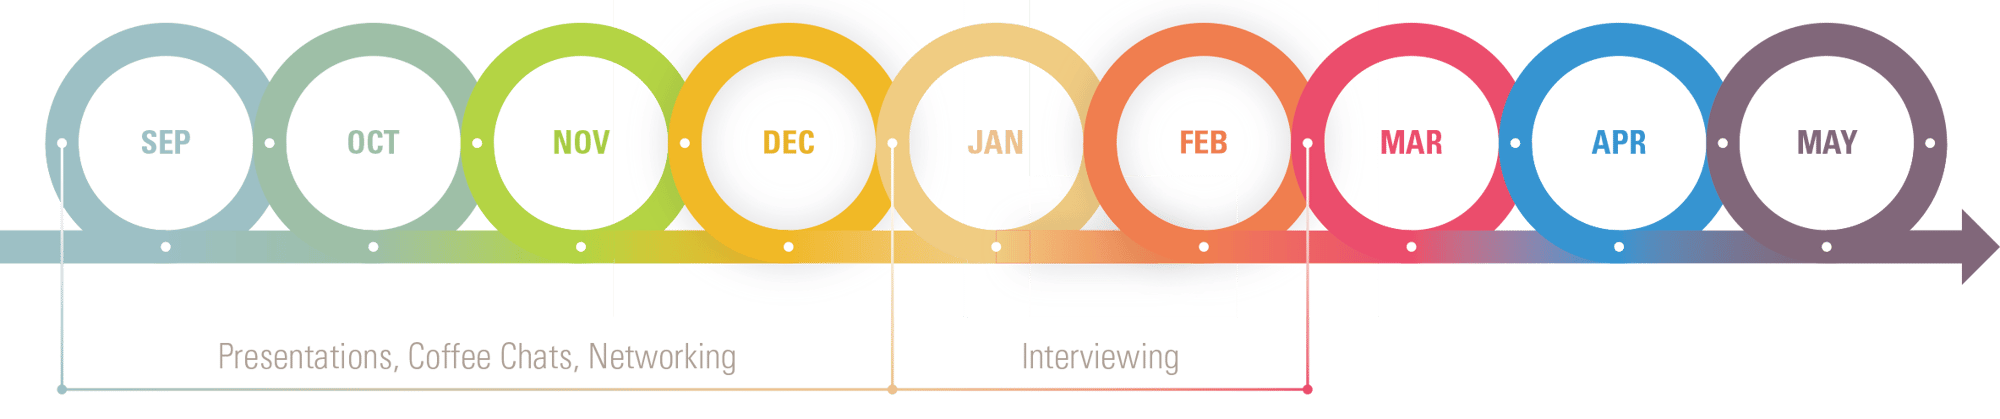 Timeline showing Presentations, Coffee Chats, Networking from September through December and interviewing January and February